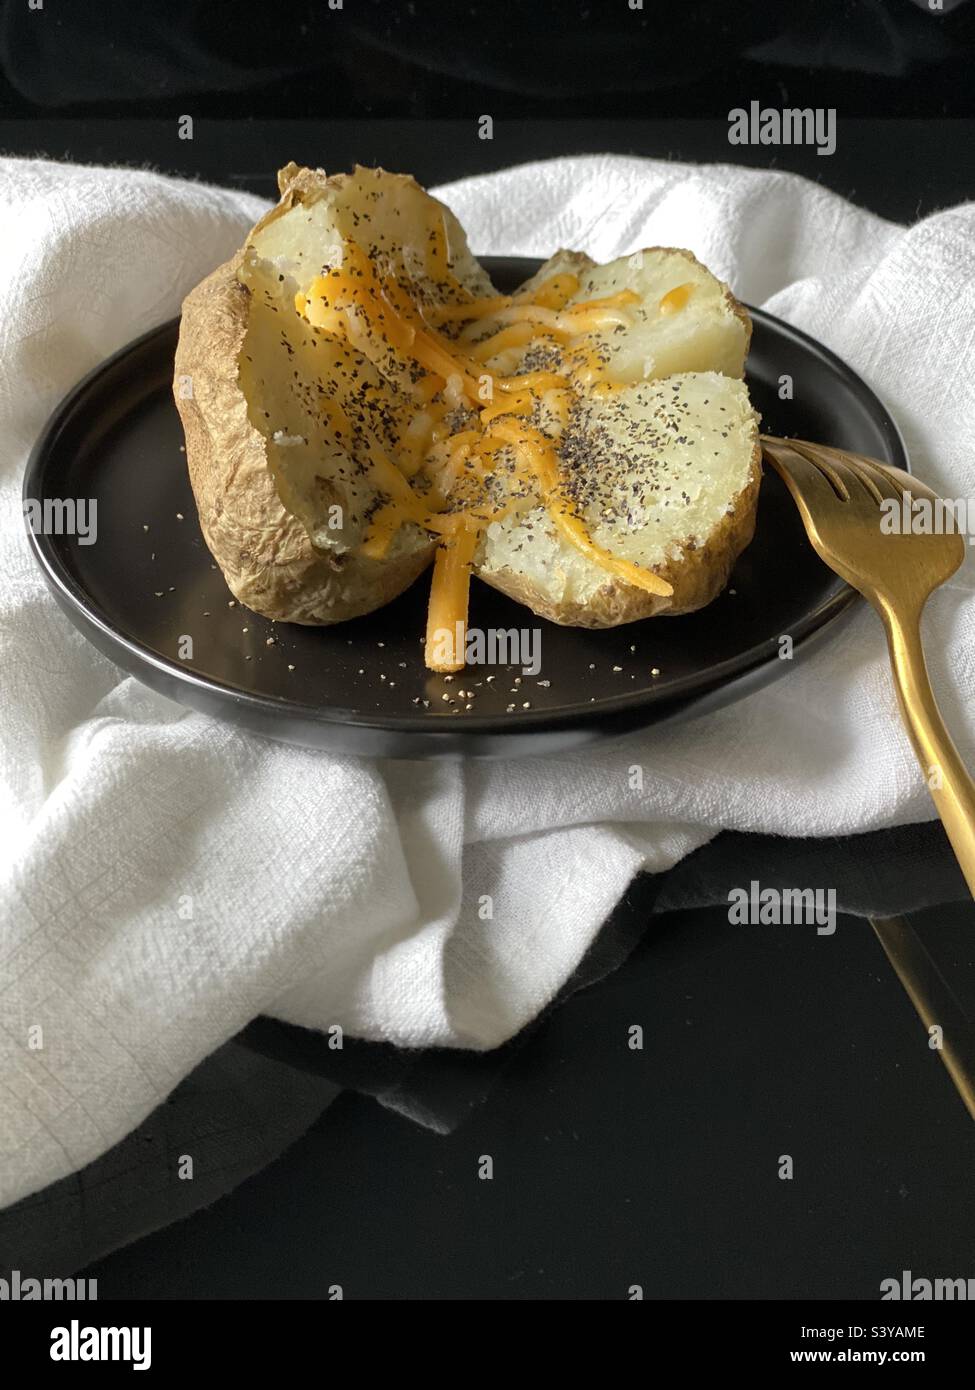 Simple baked potato with cheese Stock Photo